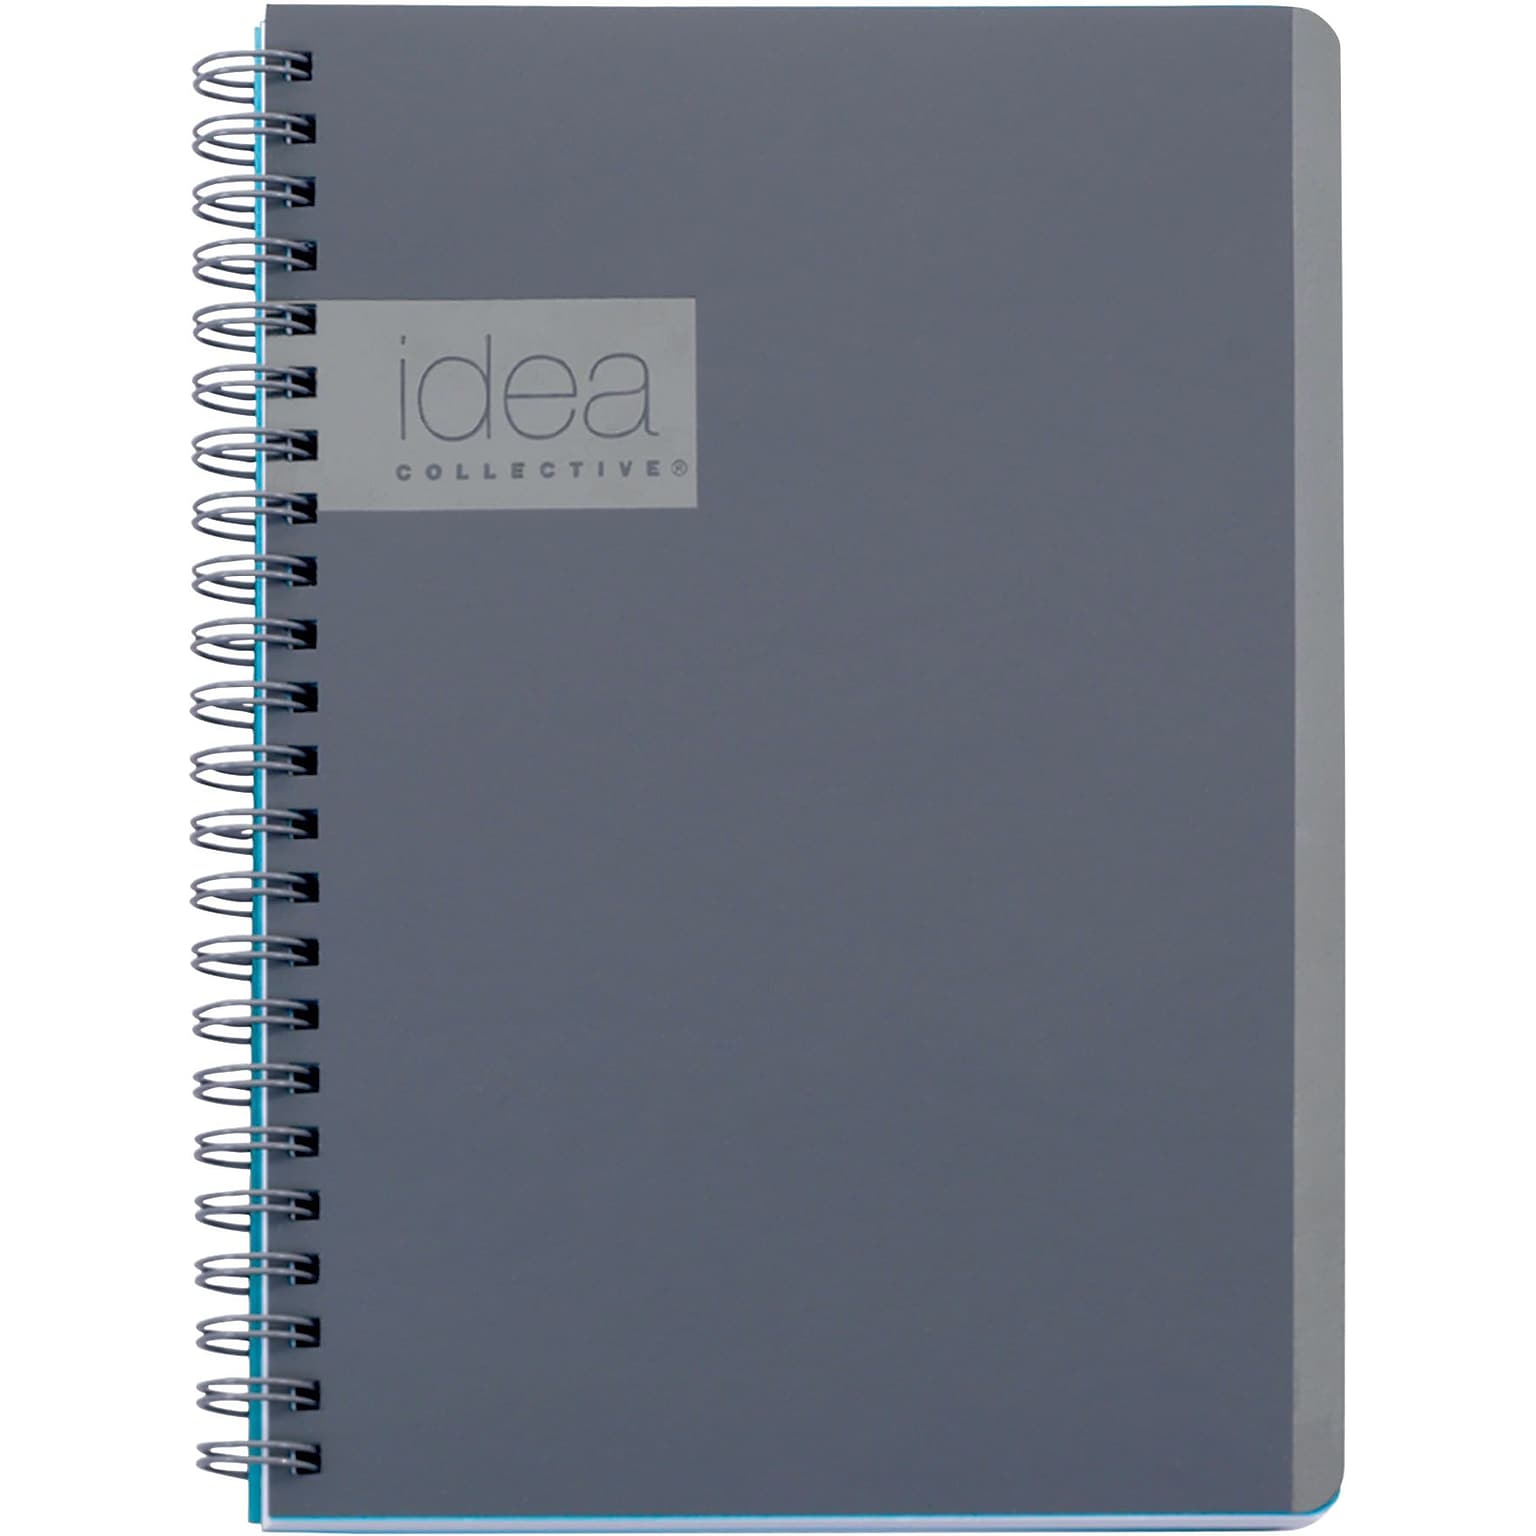 Oxford Idea Collective 1-Subject Professional Notebooks, 4.875 x 8, College Ruled, 80 Sheets, Gray/Silver (57010IC)